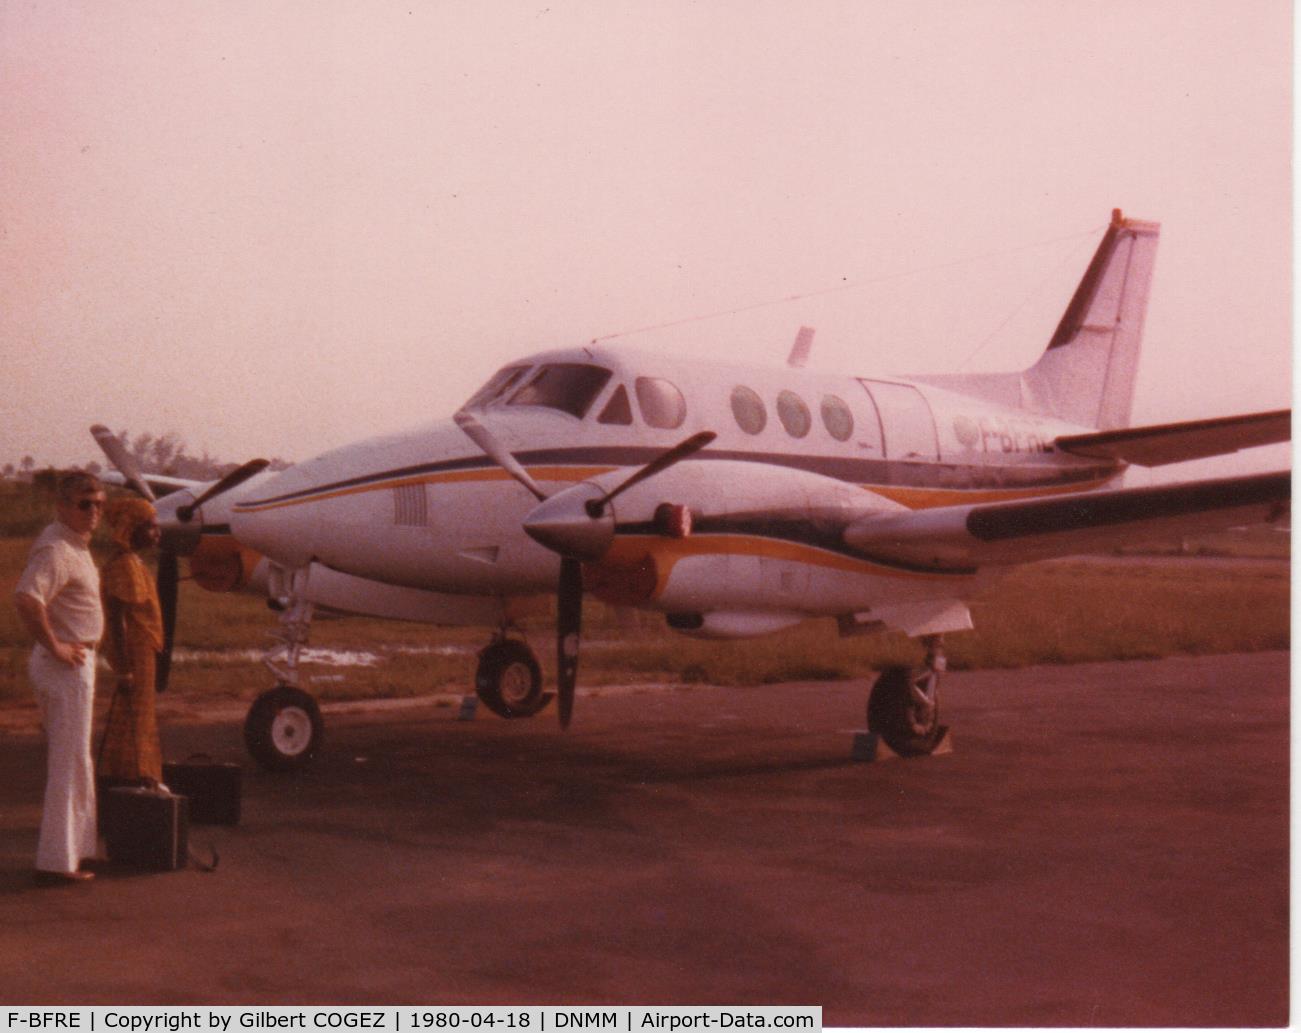 F-BFRE, Beech 65-A90 King Air C/N LJ-136, Aircraft used by Peugeot Automobile Nigeria in the late 70's, begining  80's. Became later 5N-ATU